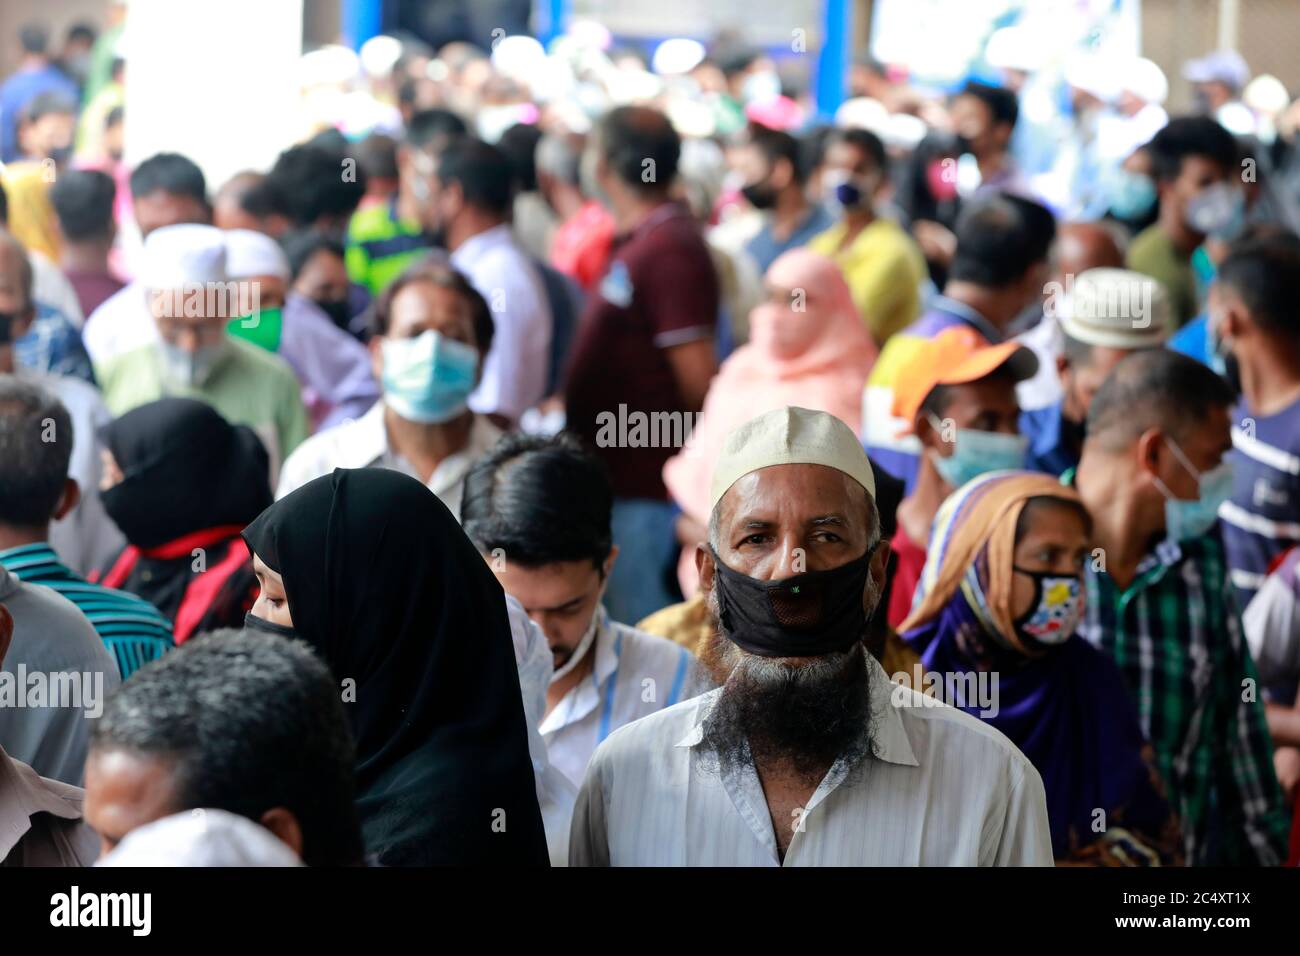 Dhaka, Bangladesh - June 29, 2020: Without maintaining social distancing, people stand in queues to pay their water bills at the Jatrabari wasa office Stock Photo